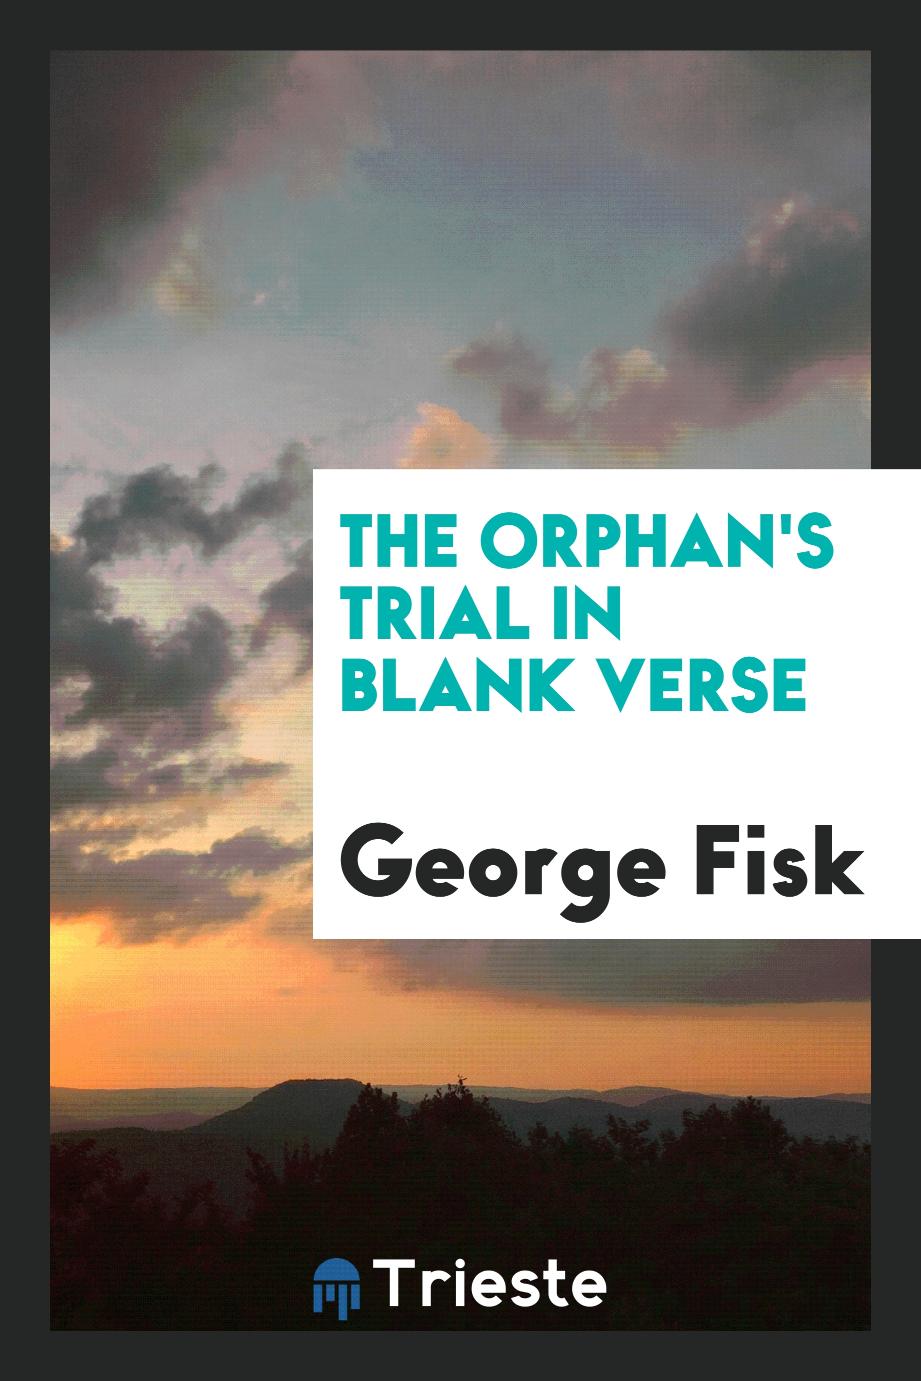 The orphan's trial in blank verse